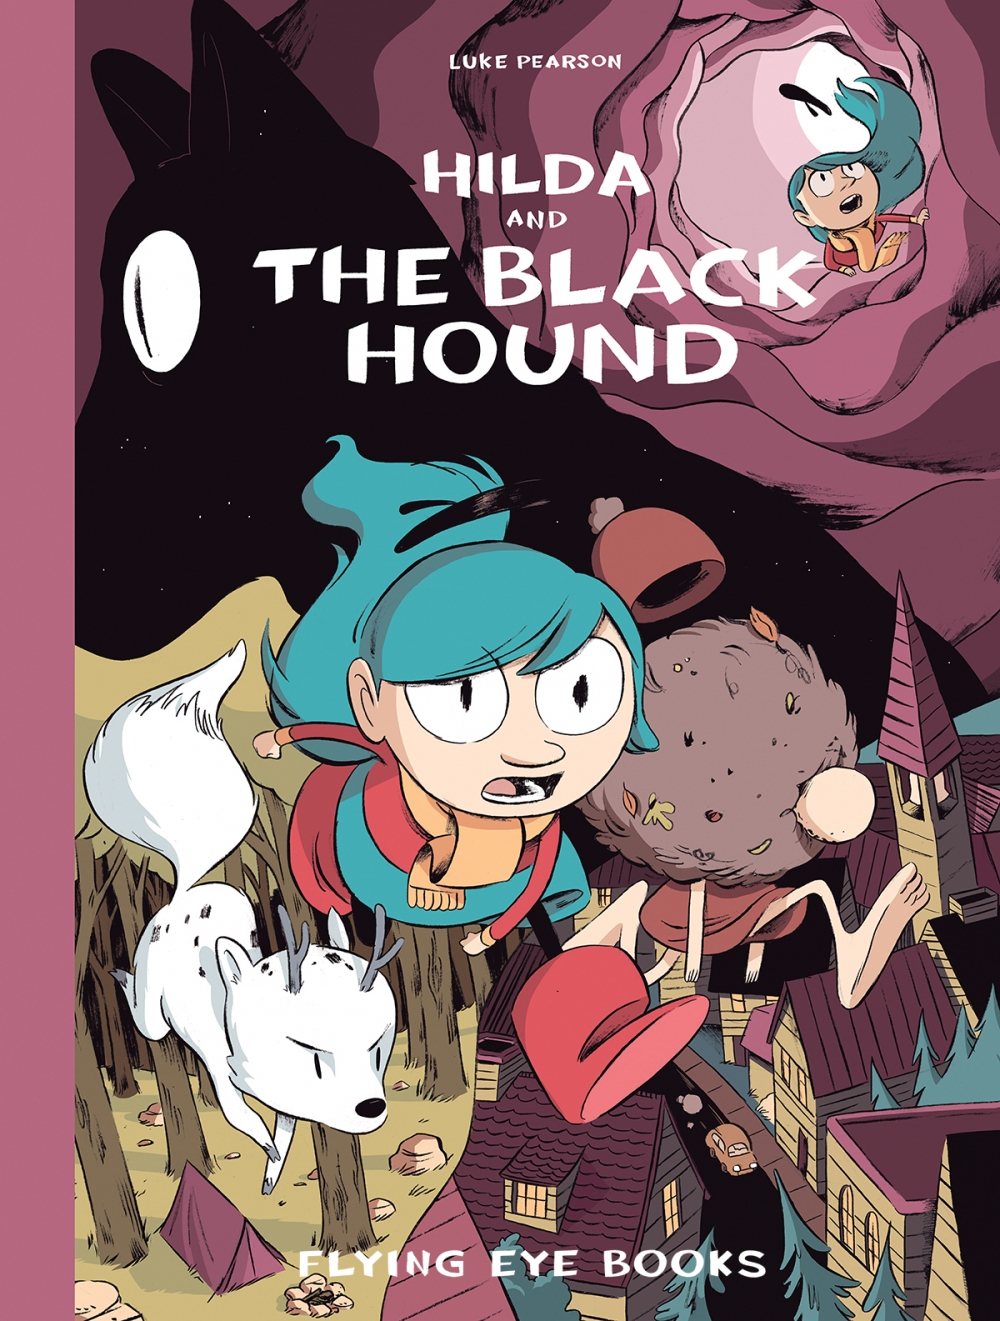 Review Of Hilda And The Black Hound 9781909263185 — Foreword Reviews